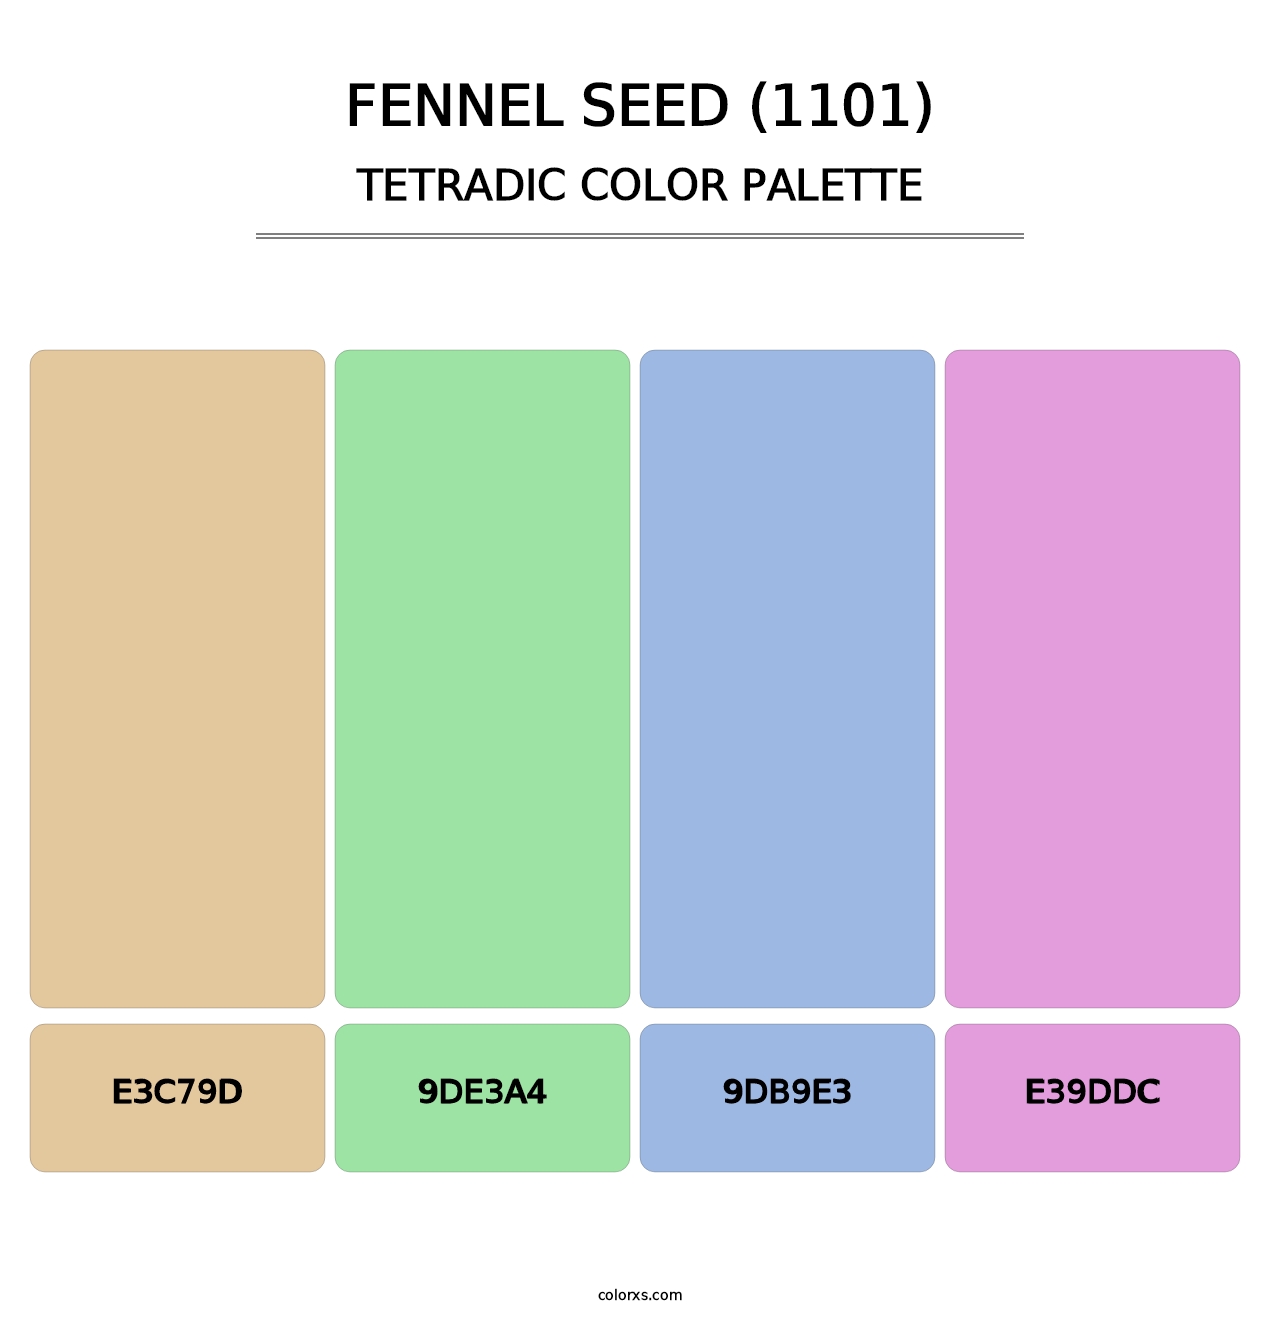 Fennel Seed (1101) - Tetradic Color Palette